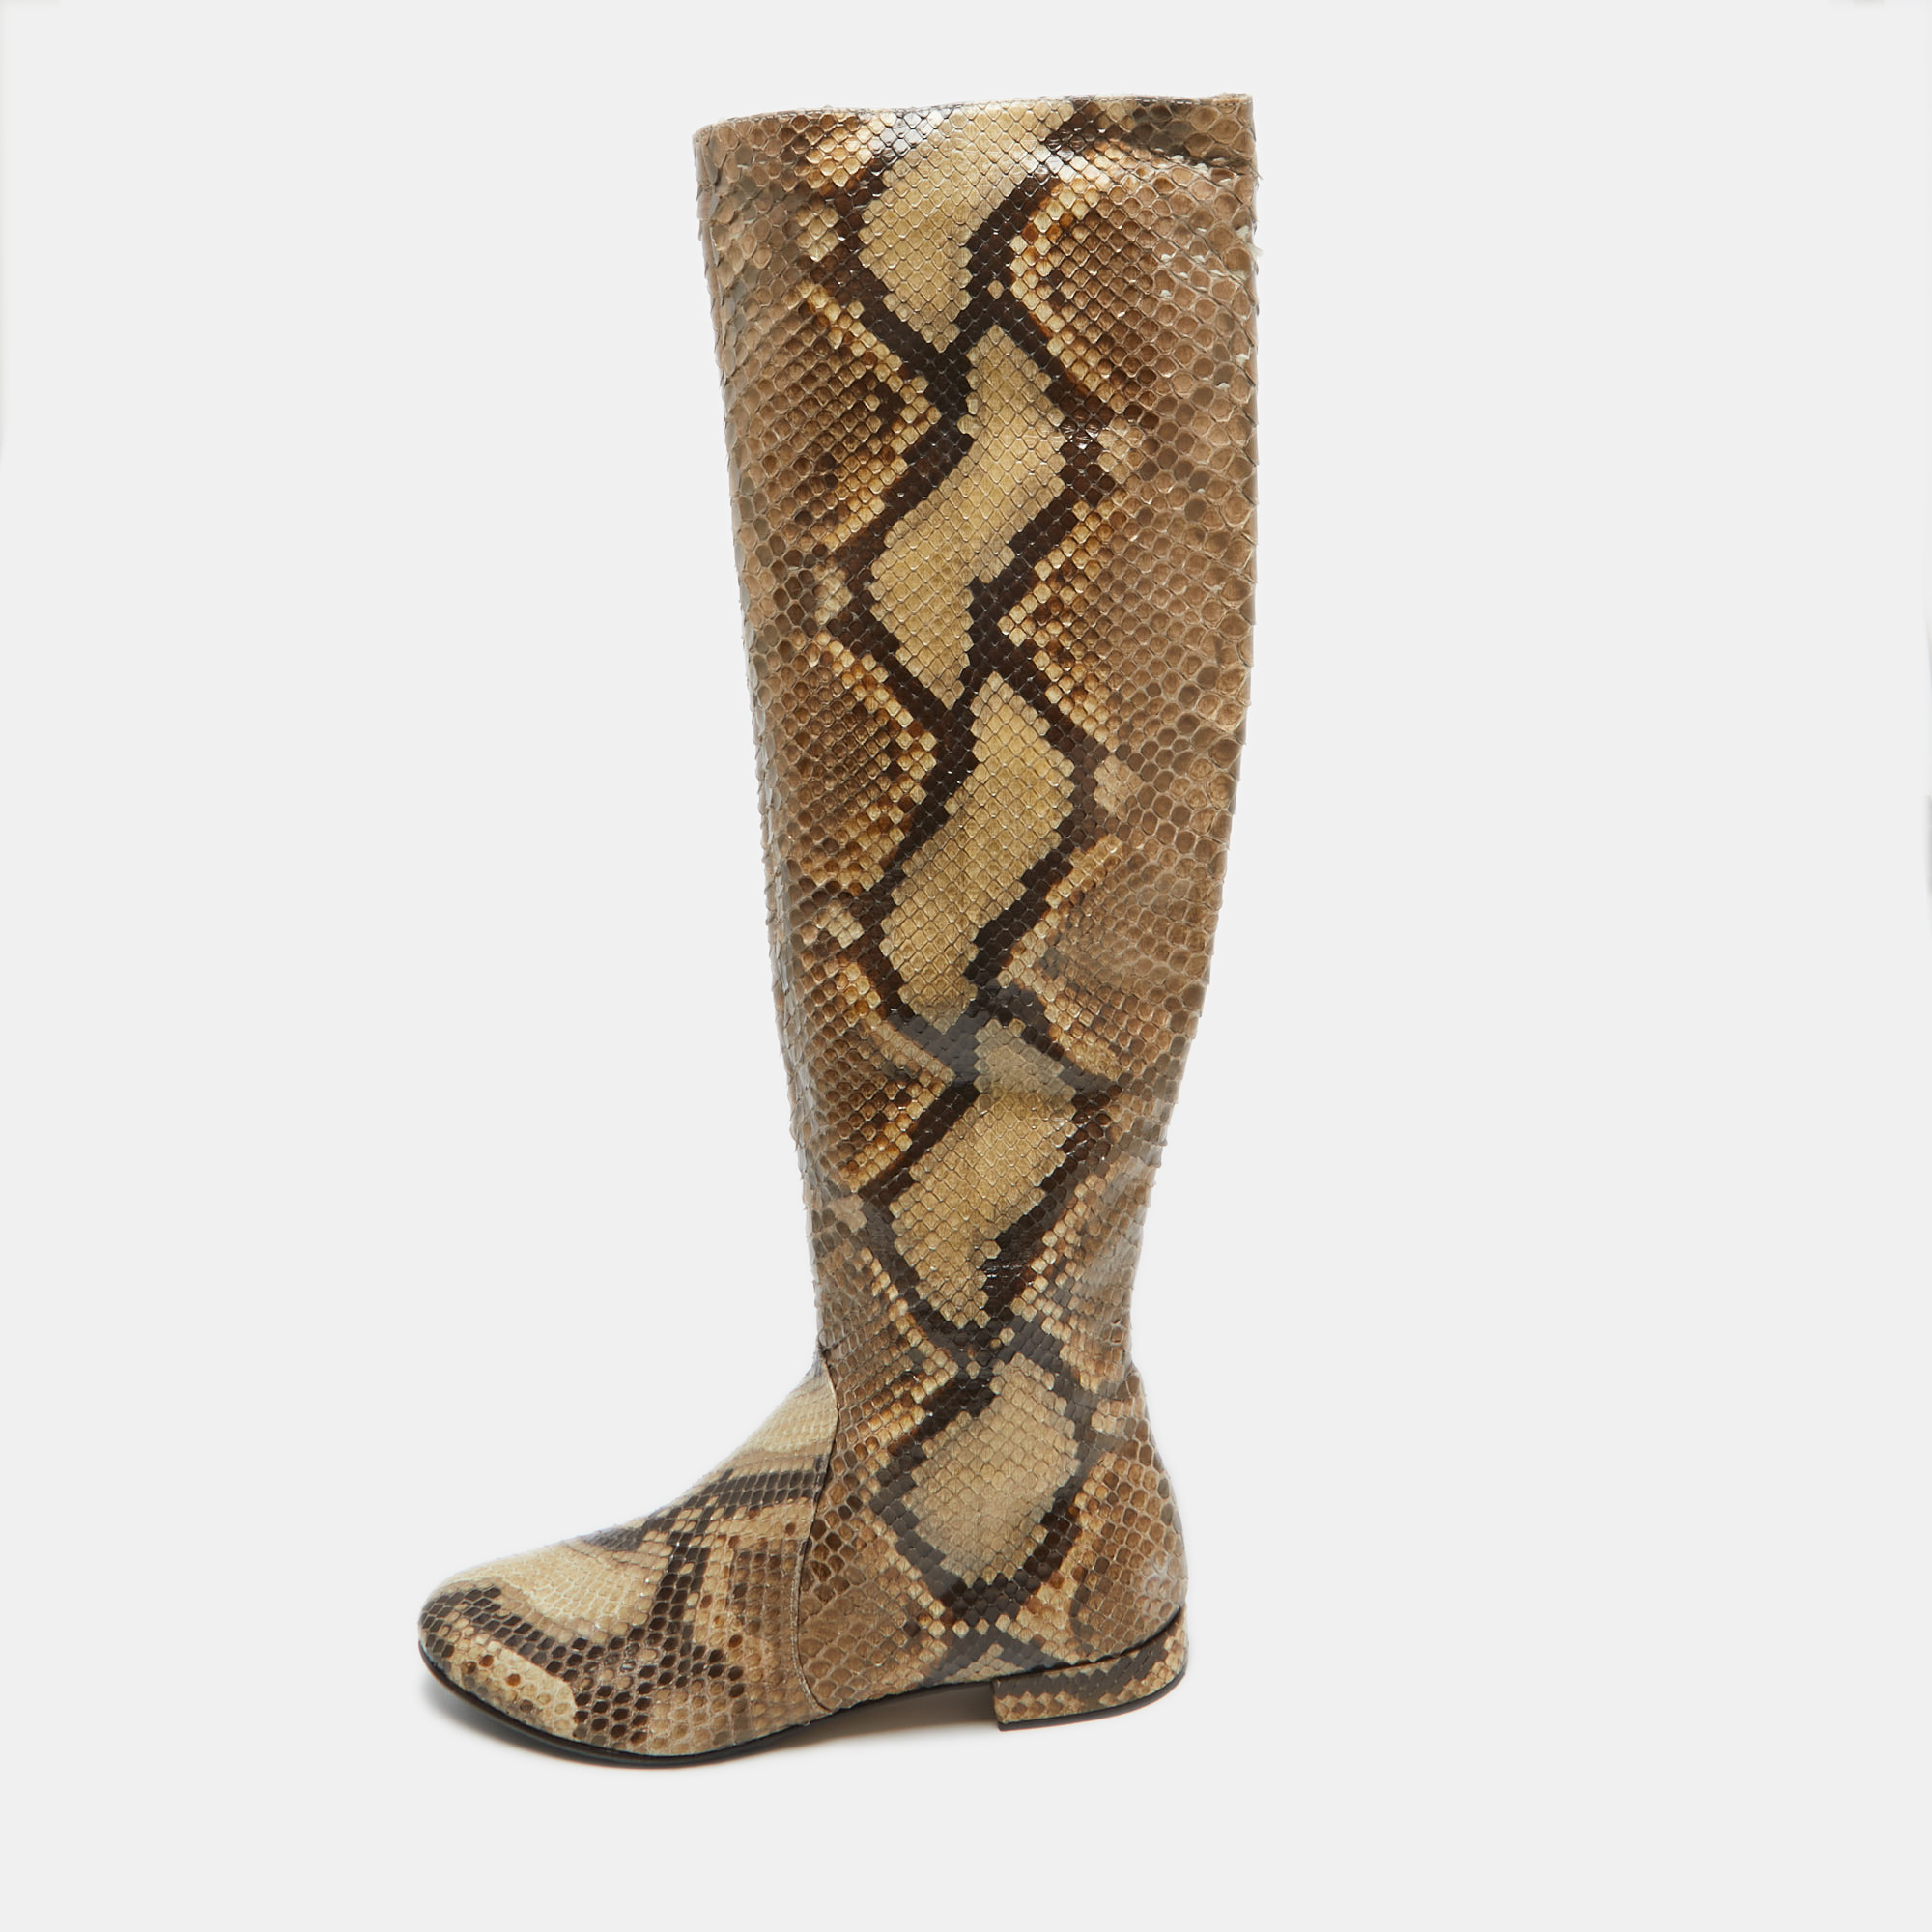 Le silla beige/brown python knee length boots size 37